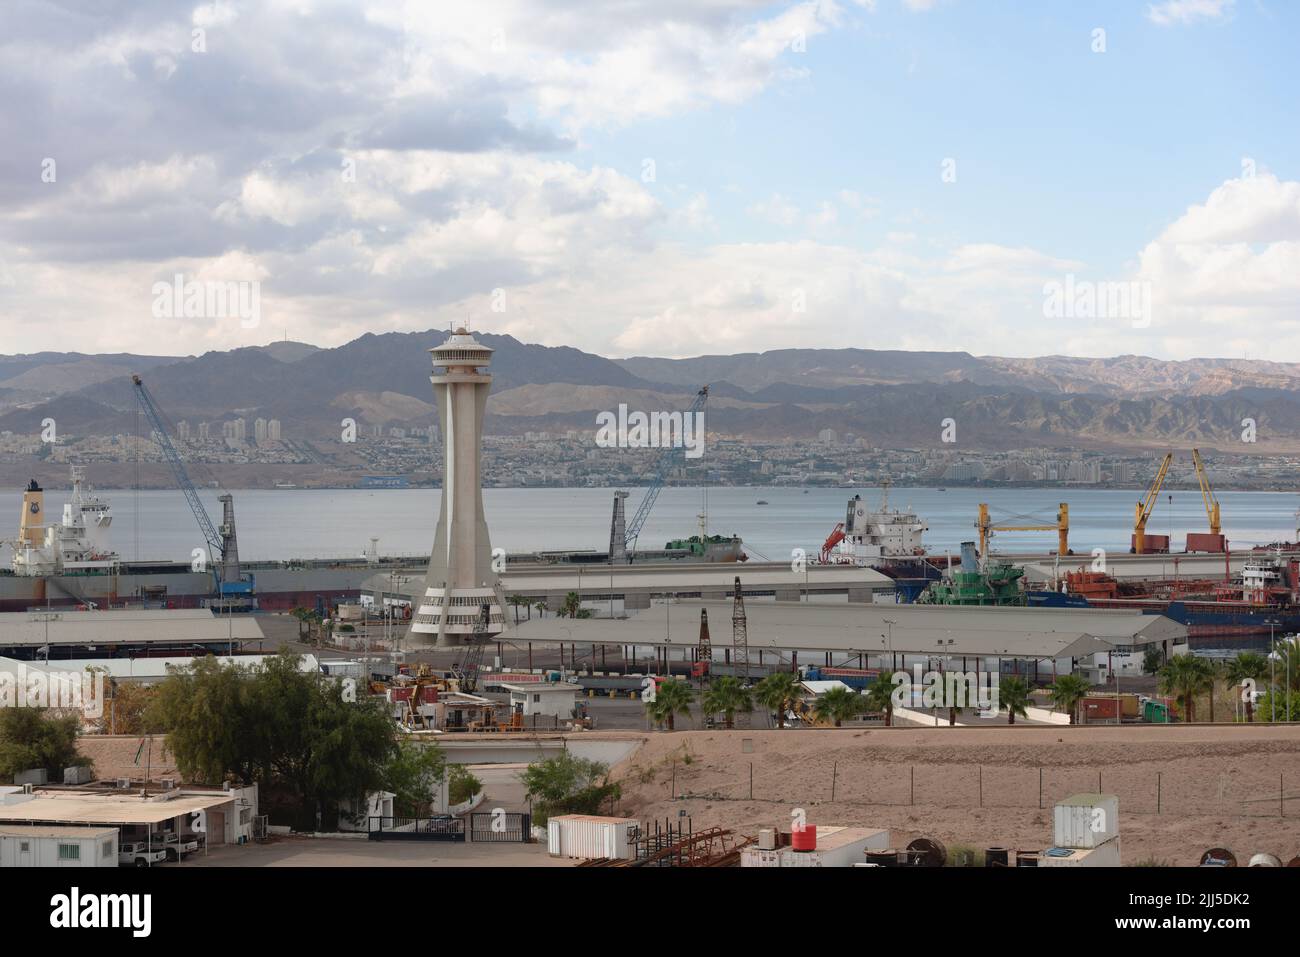 Aqaba, Jordan - March 14, 2014: View to the cargo port of Aqaba. The port's location linking Africa and the Middle East Stock Photo